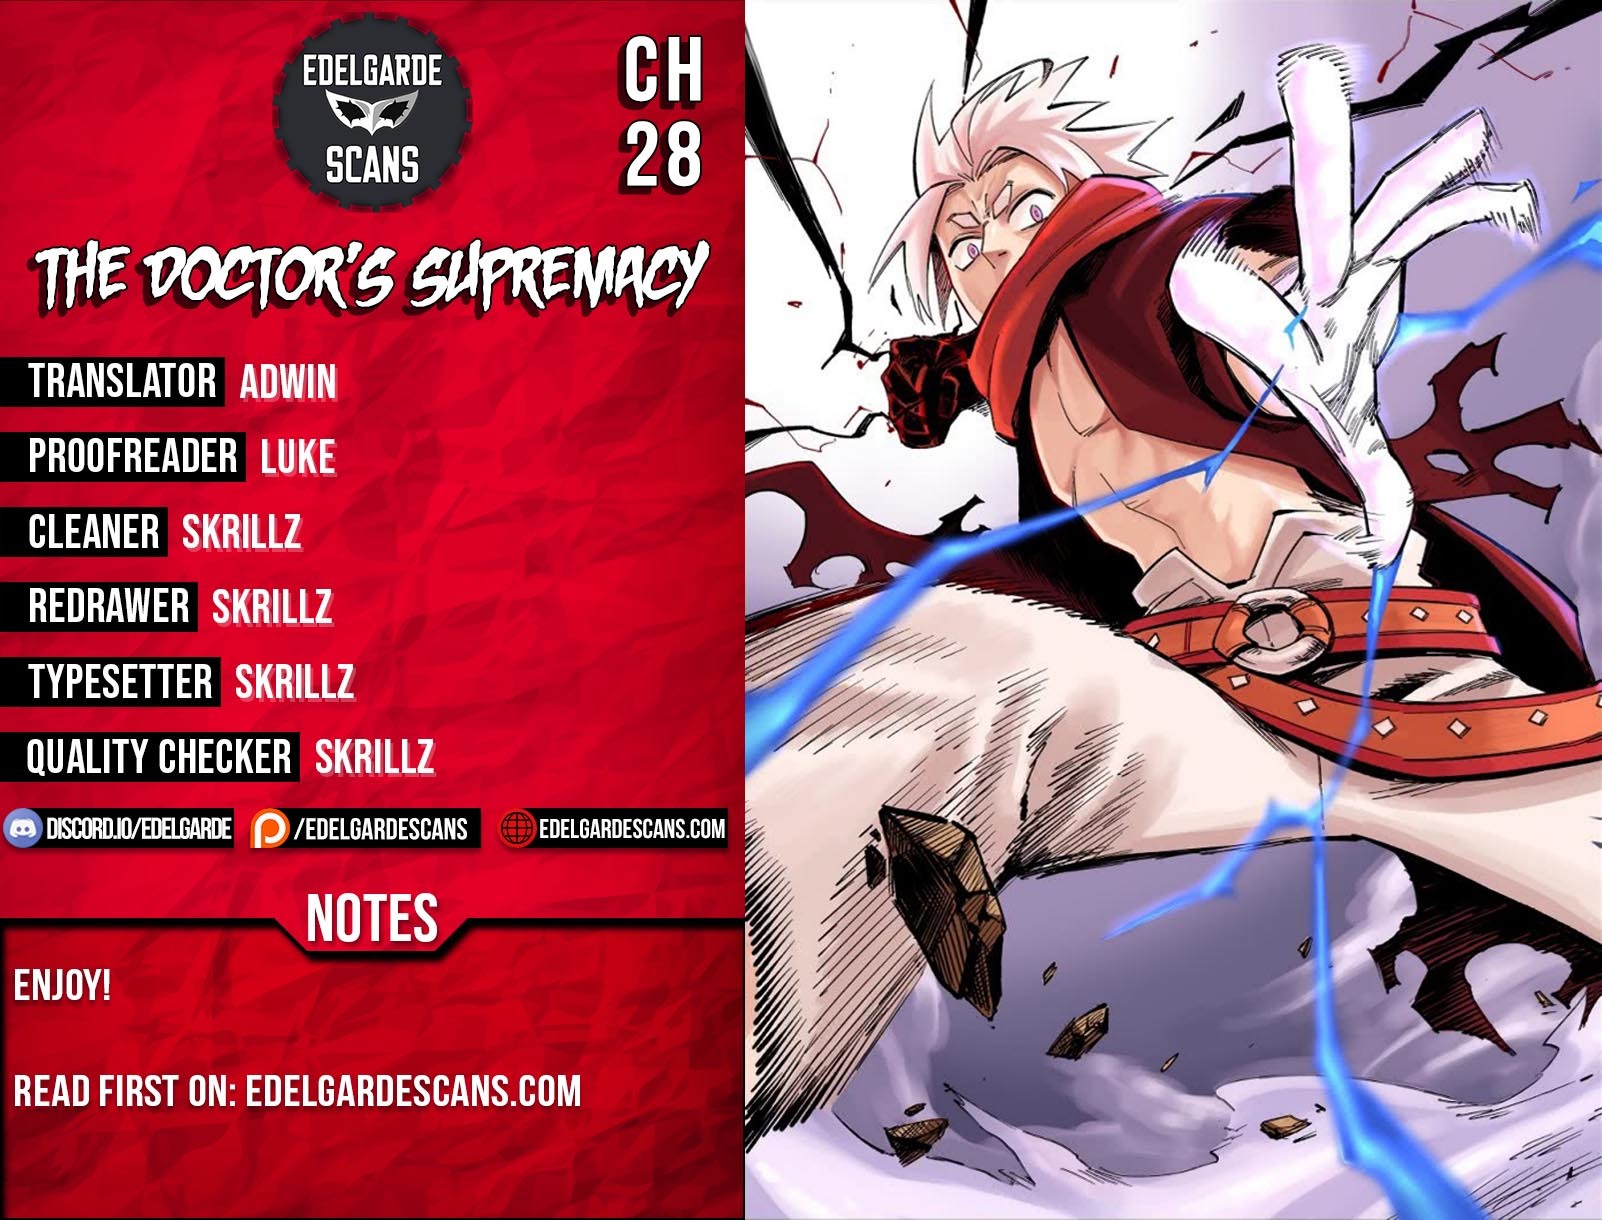 The Doctor's Supremacy ch.28